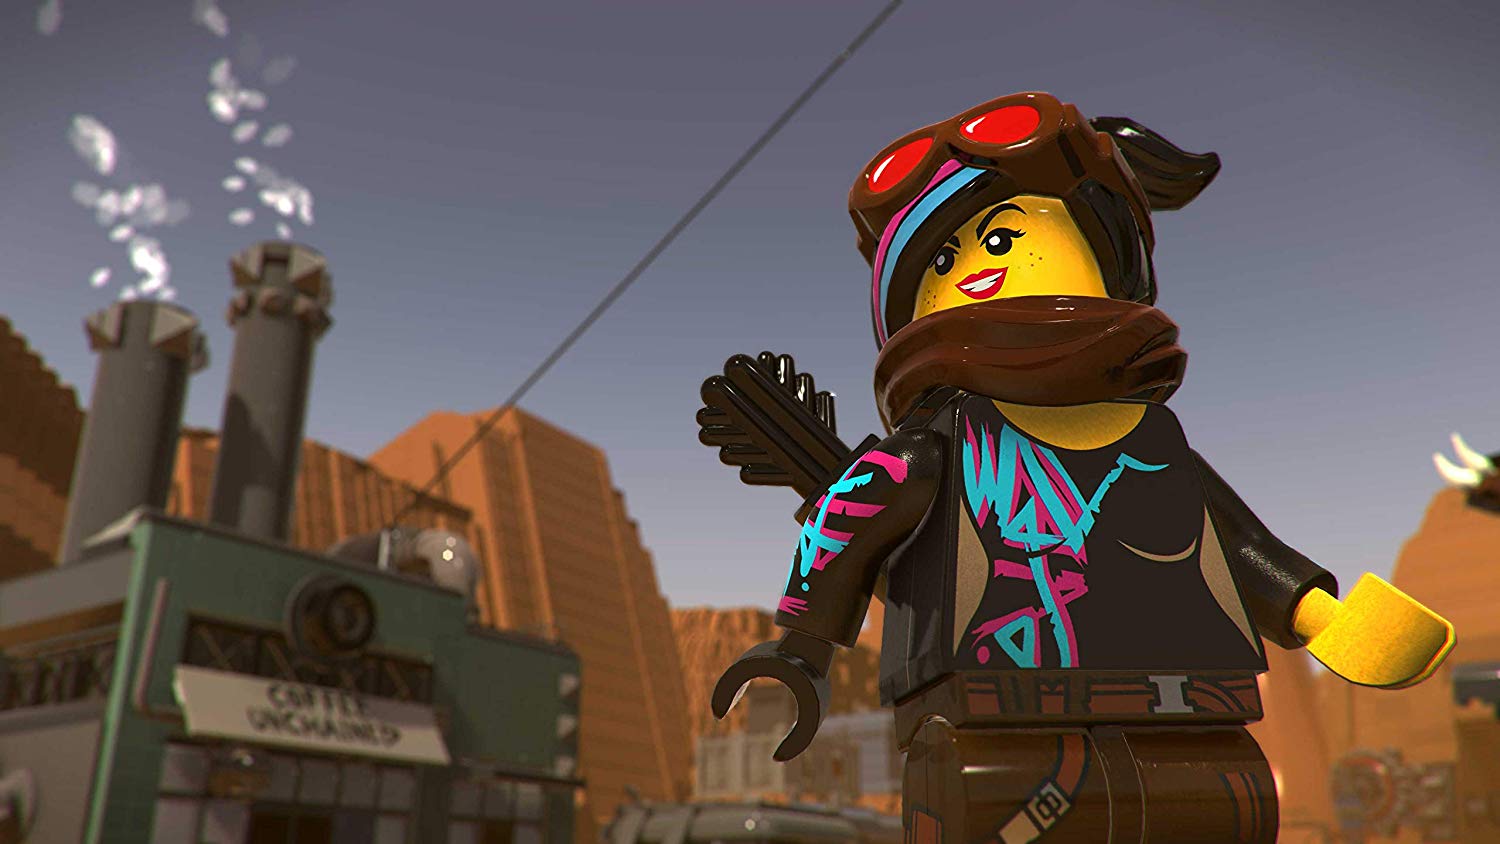 The LEGO Movie 2 Videogame - Nintendo Switch - image 3 of 4